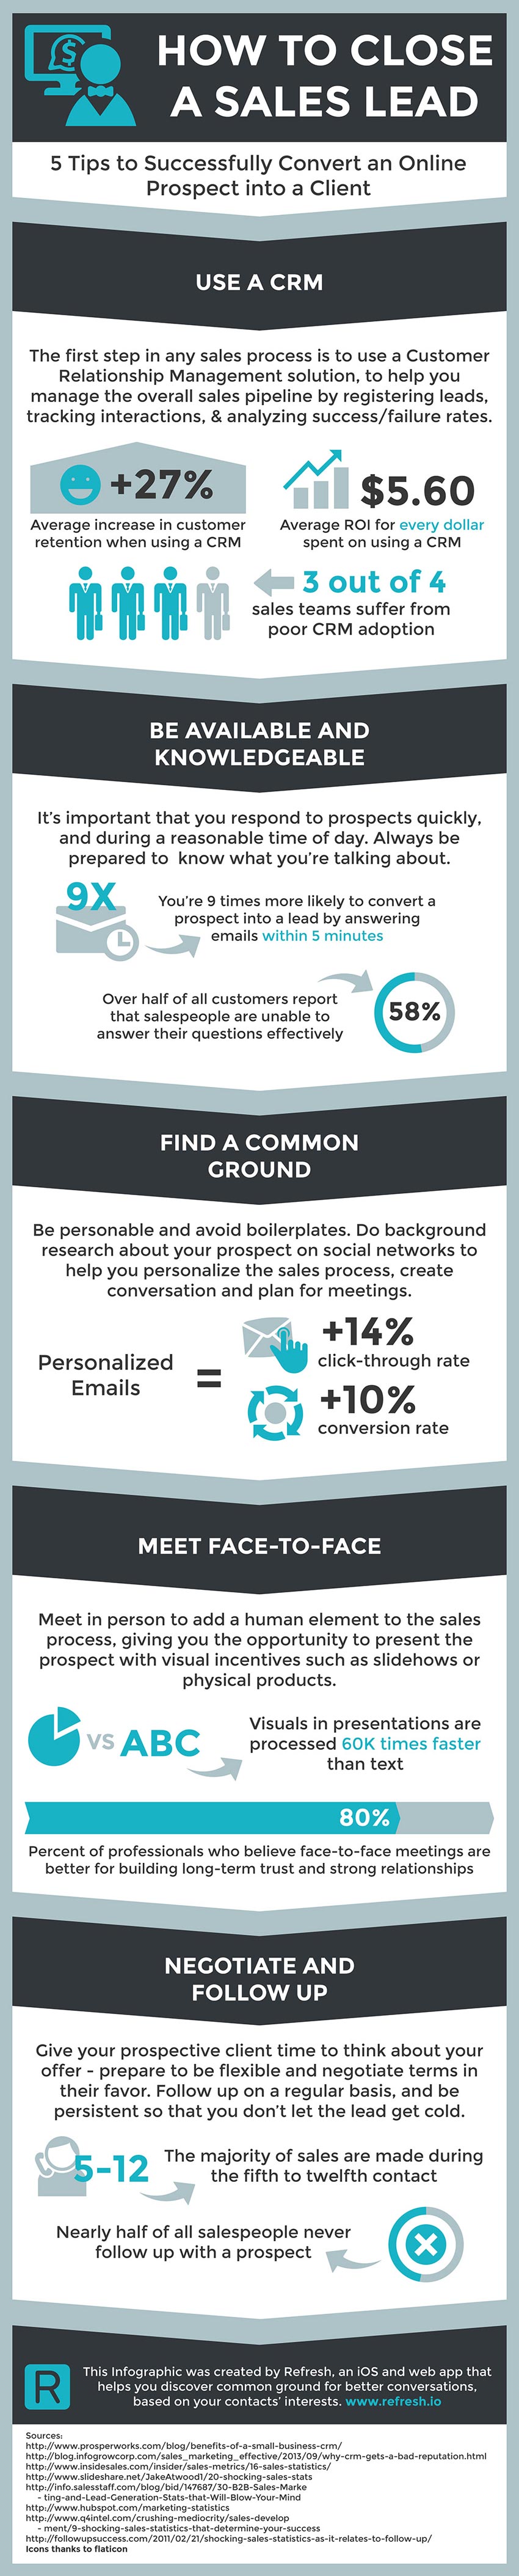 How to close a sales lead infographic